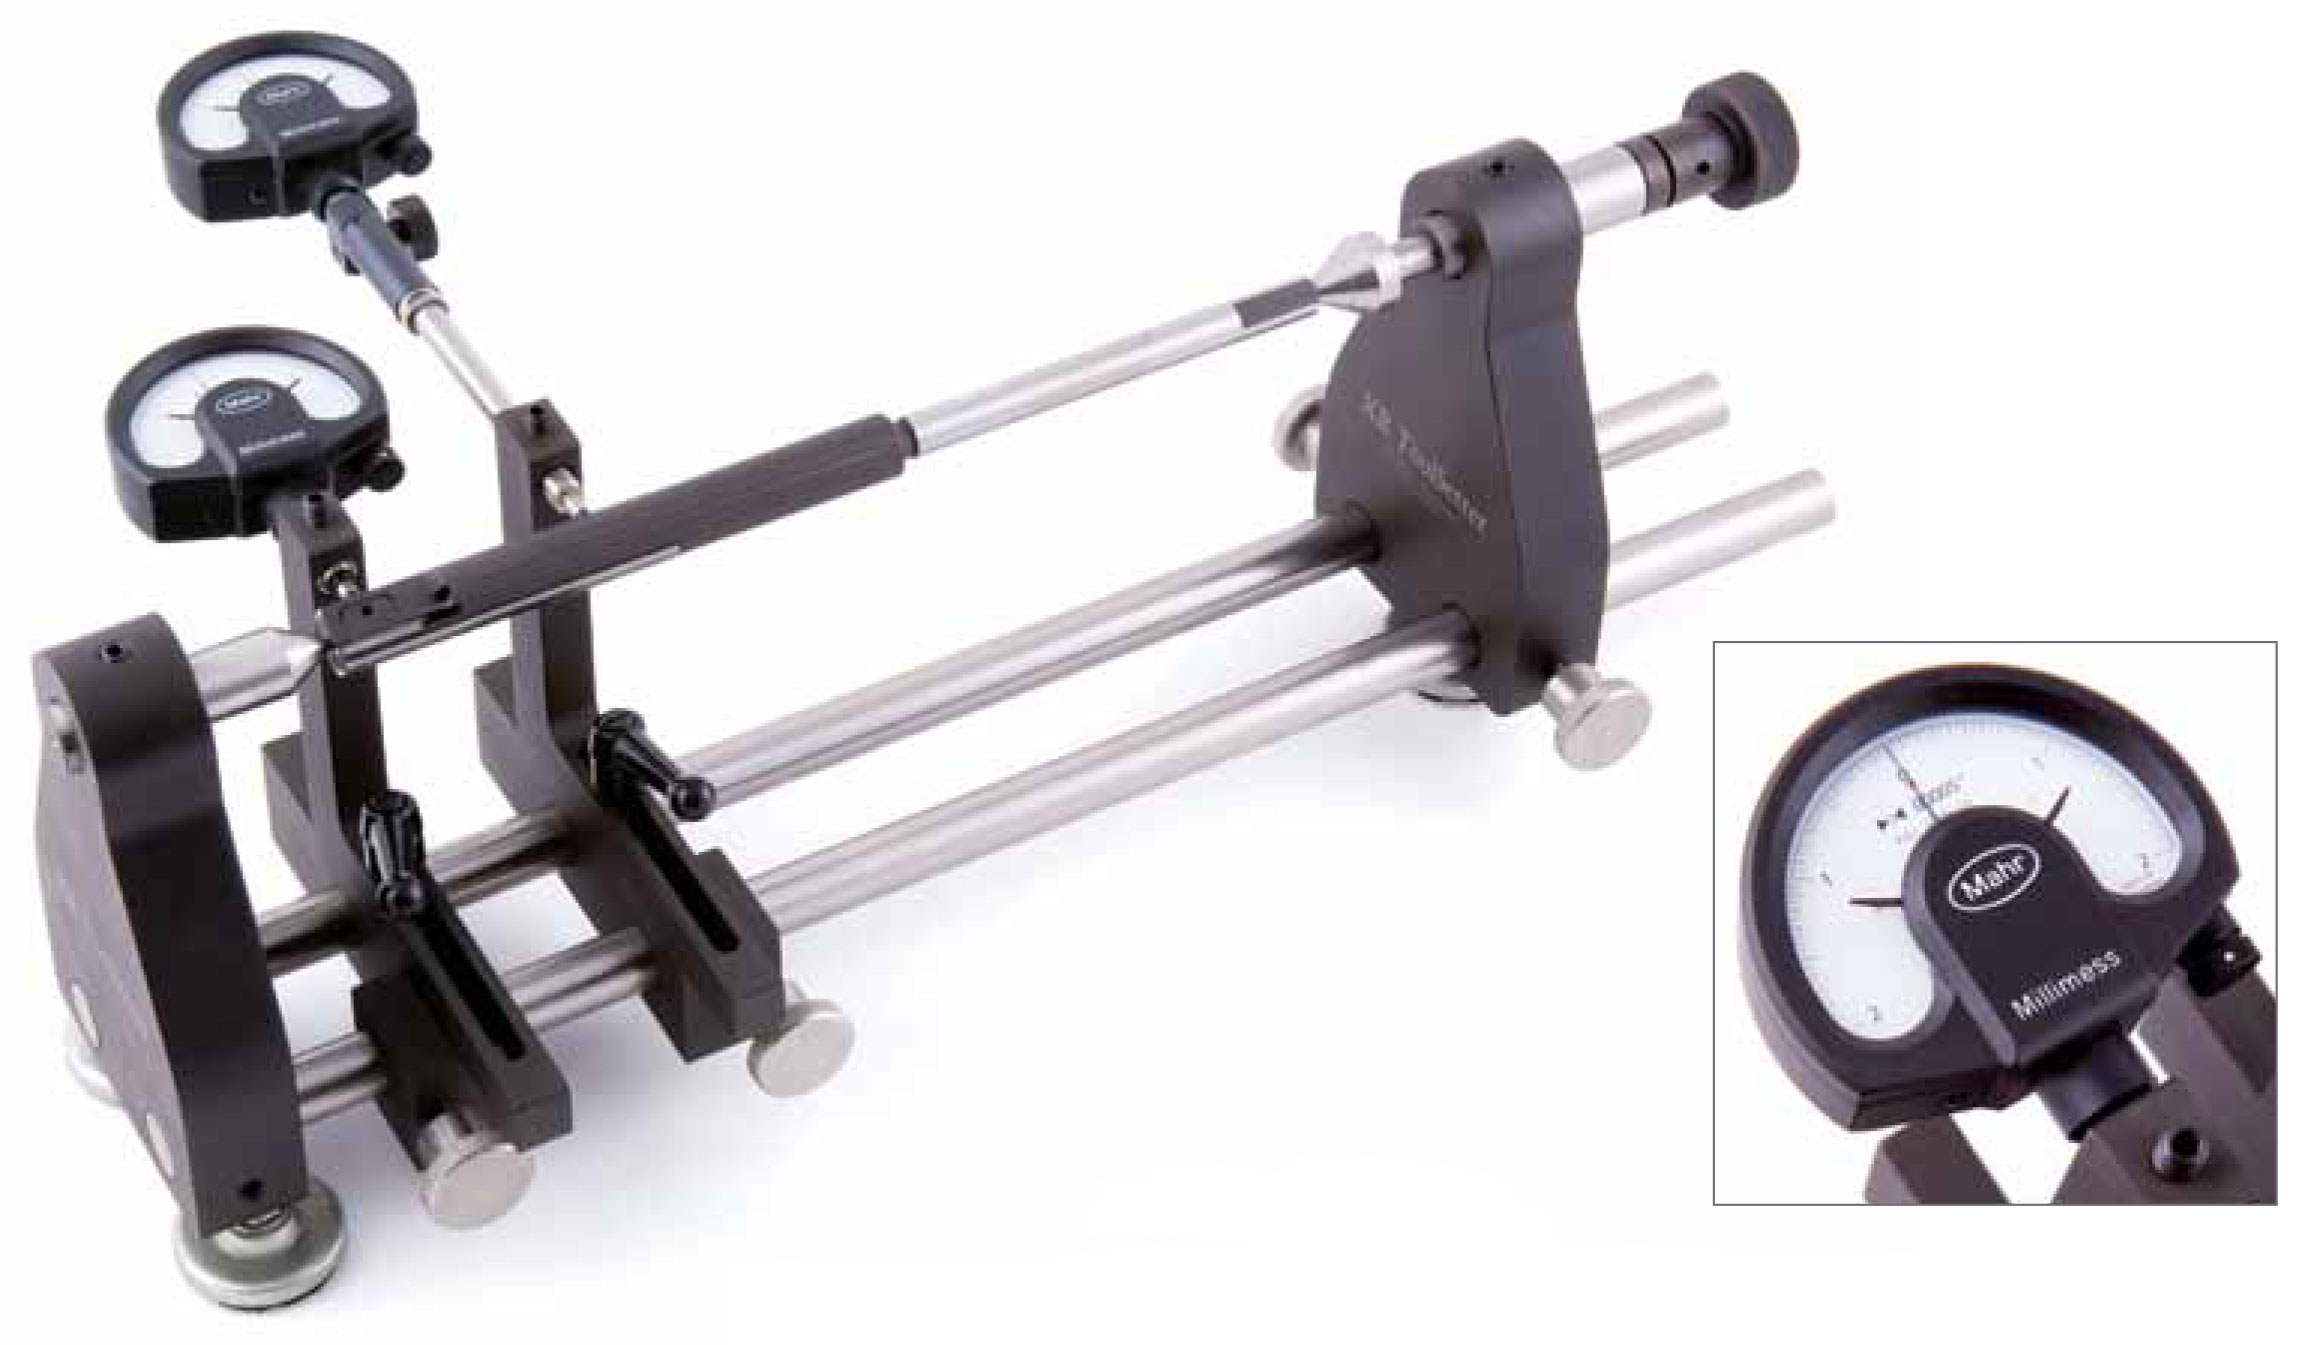 XR Tool Setter-1 is a bench center that measures tools up to 4″ in diameter and 12″ long and comes with a spring-loaded center.